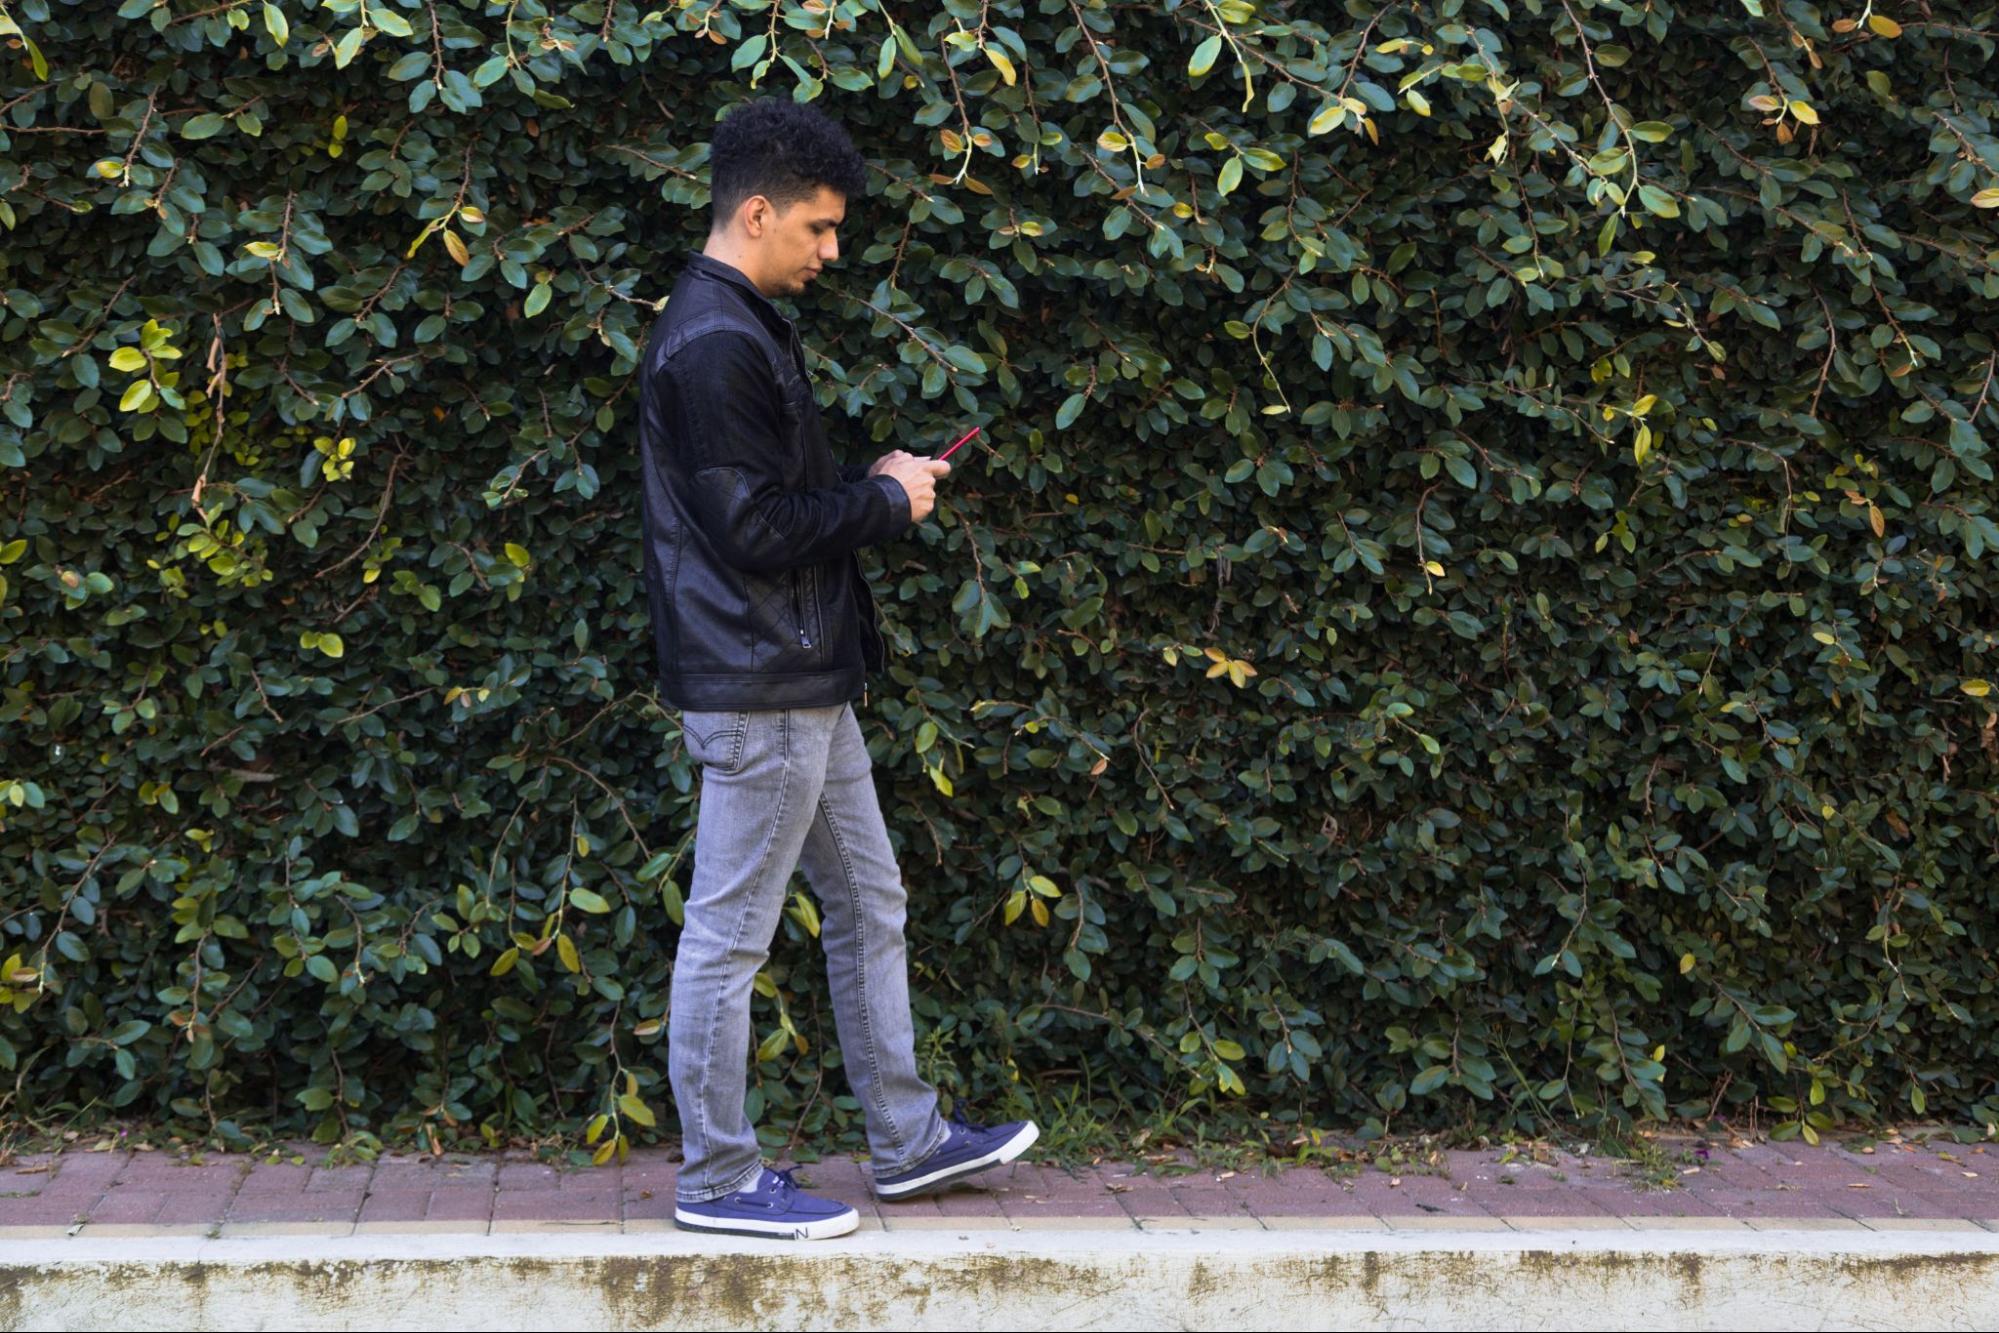 Man looking at his phone while walking on the sidewalk